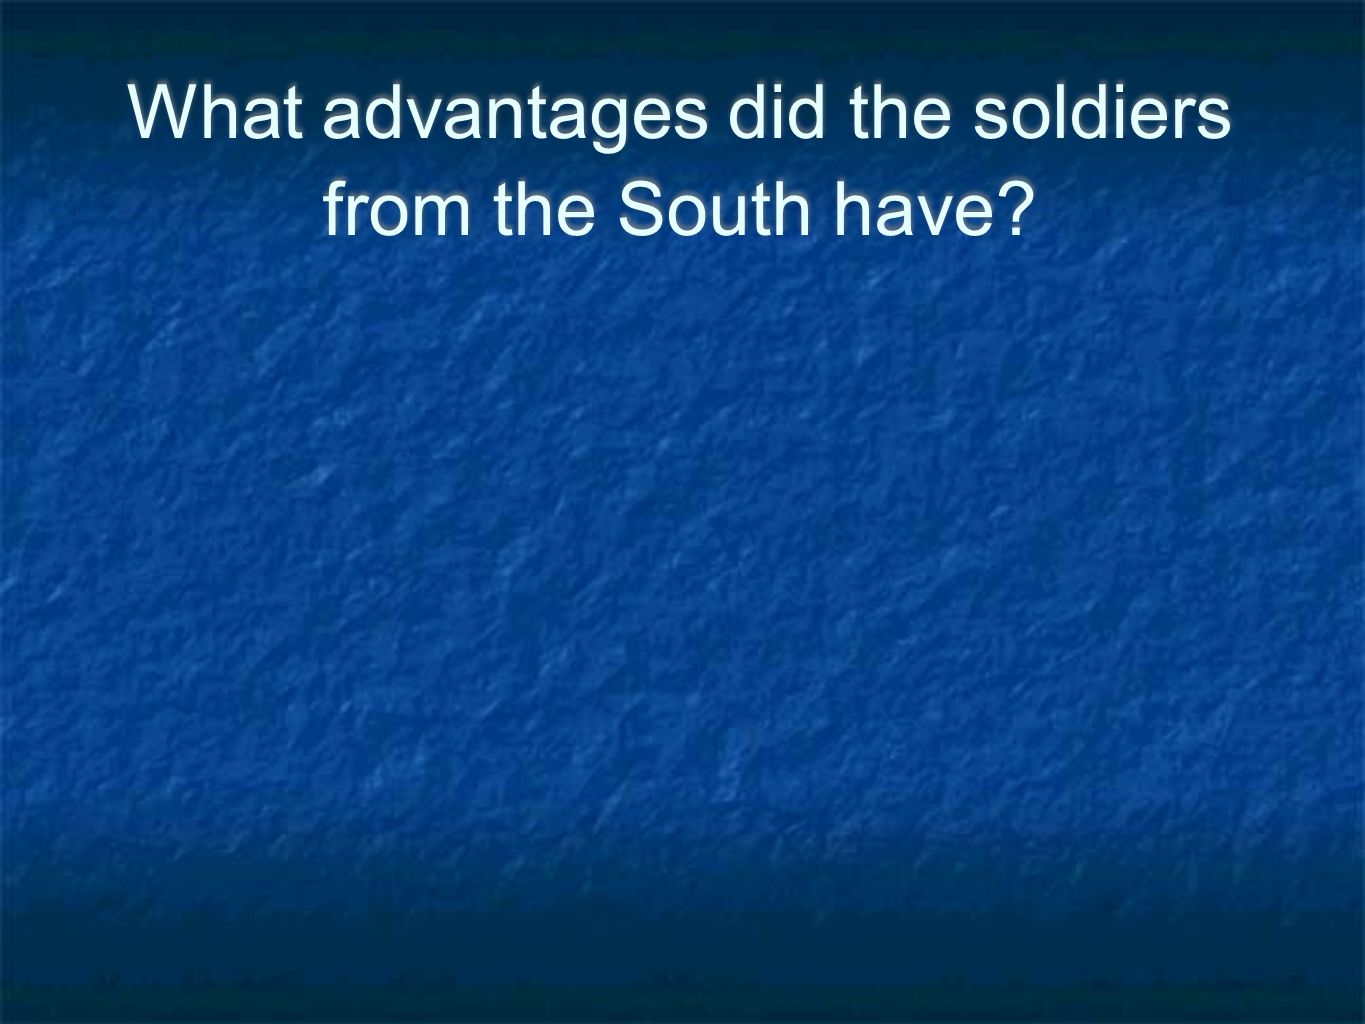 What advantages did the soldiers from the South have